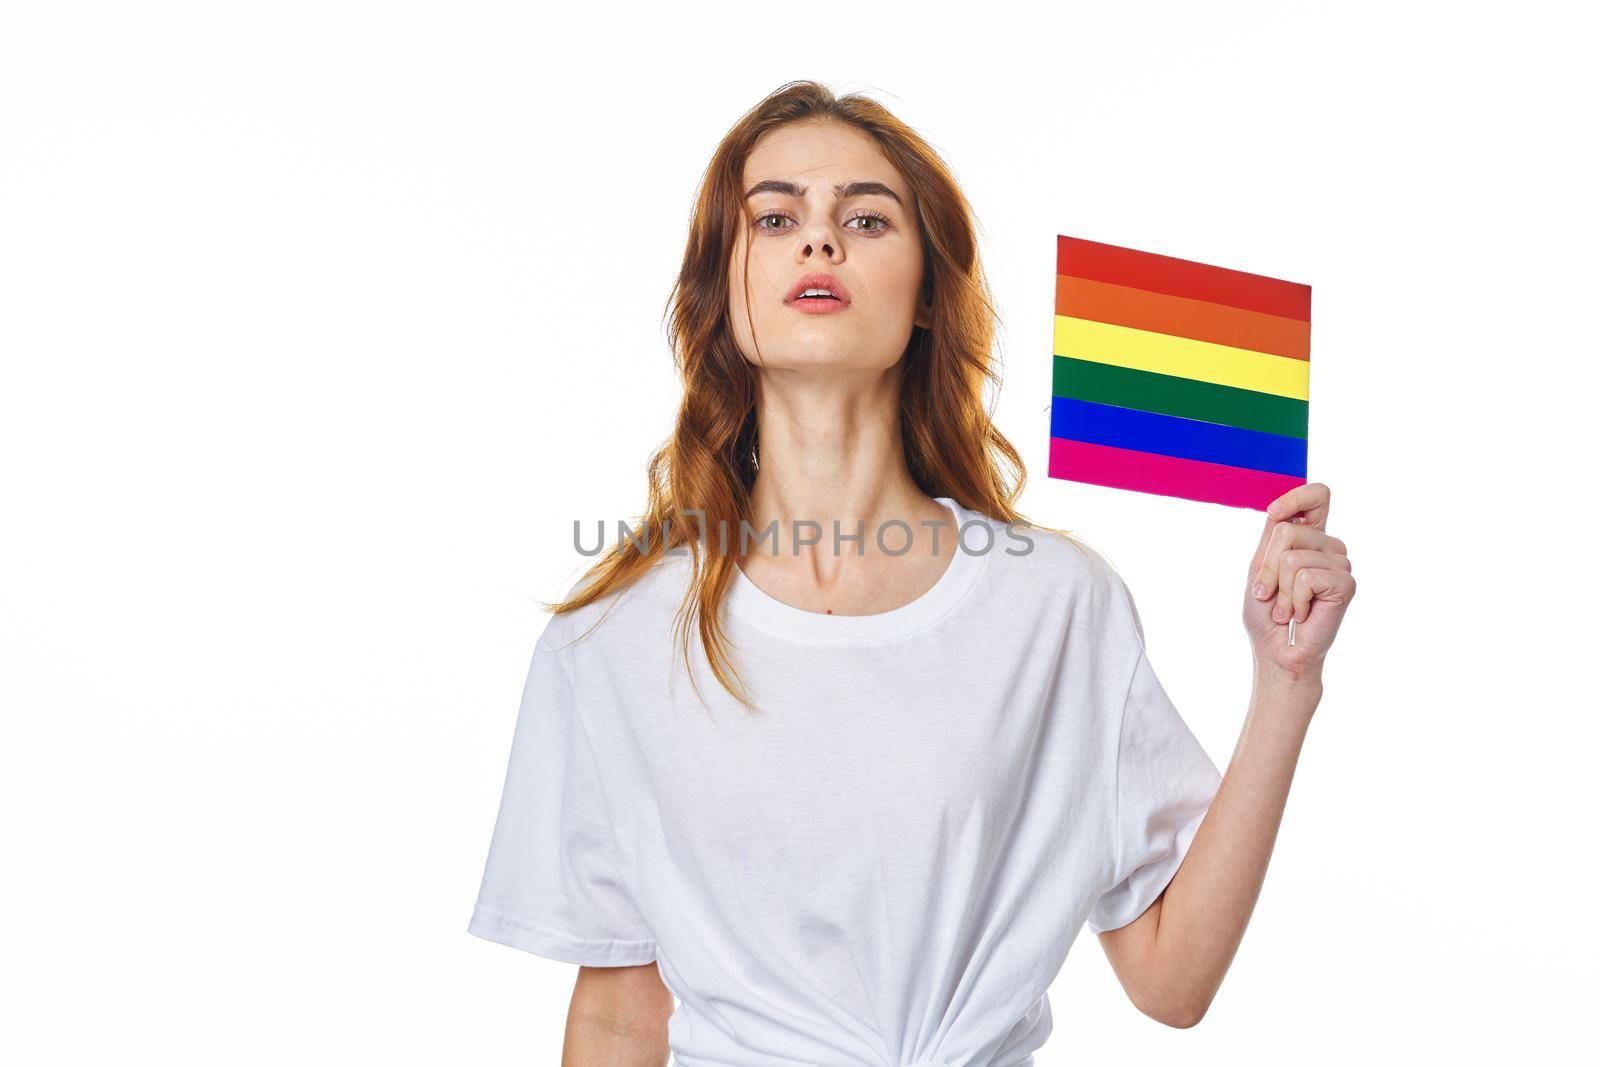 woman wearing white t-shirt lgbt Flag transgender community Protest. High quality photo